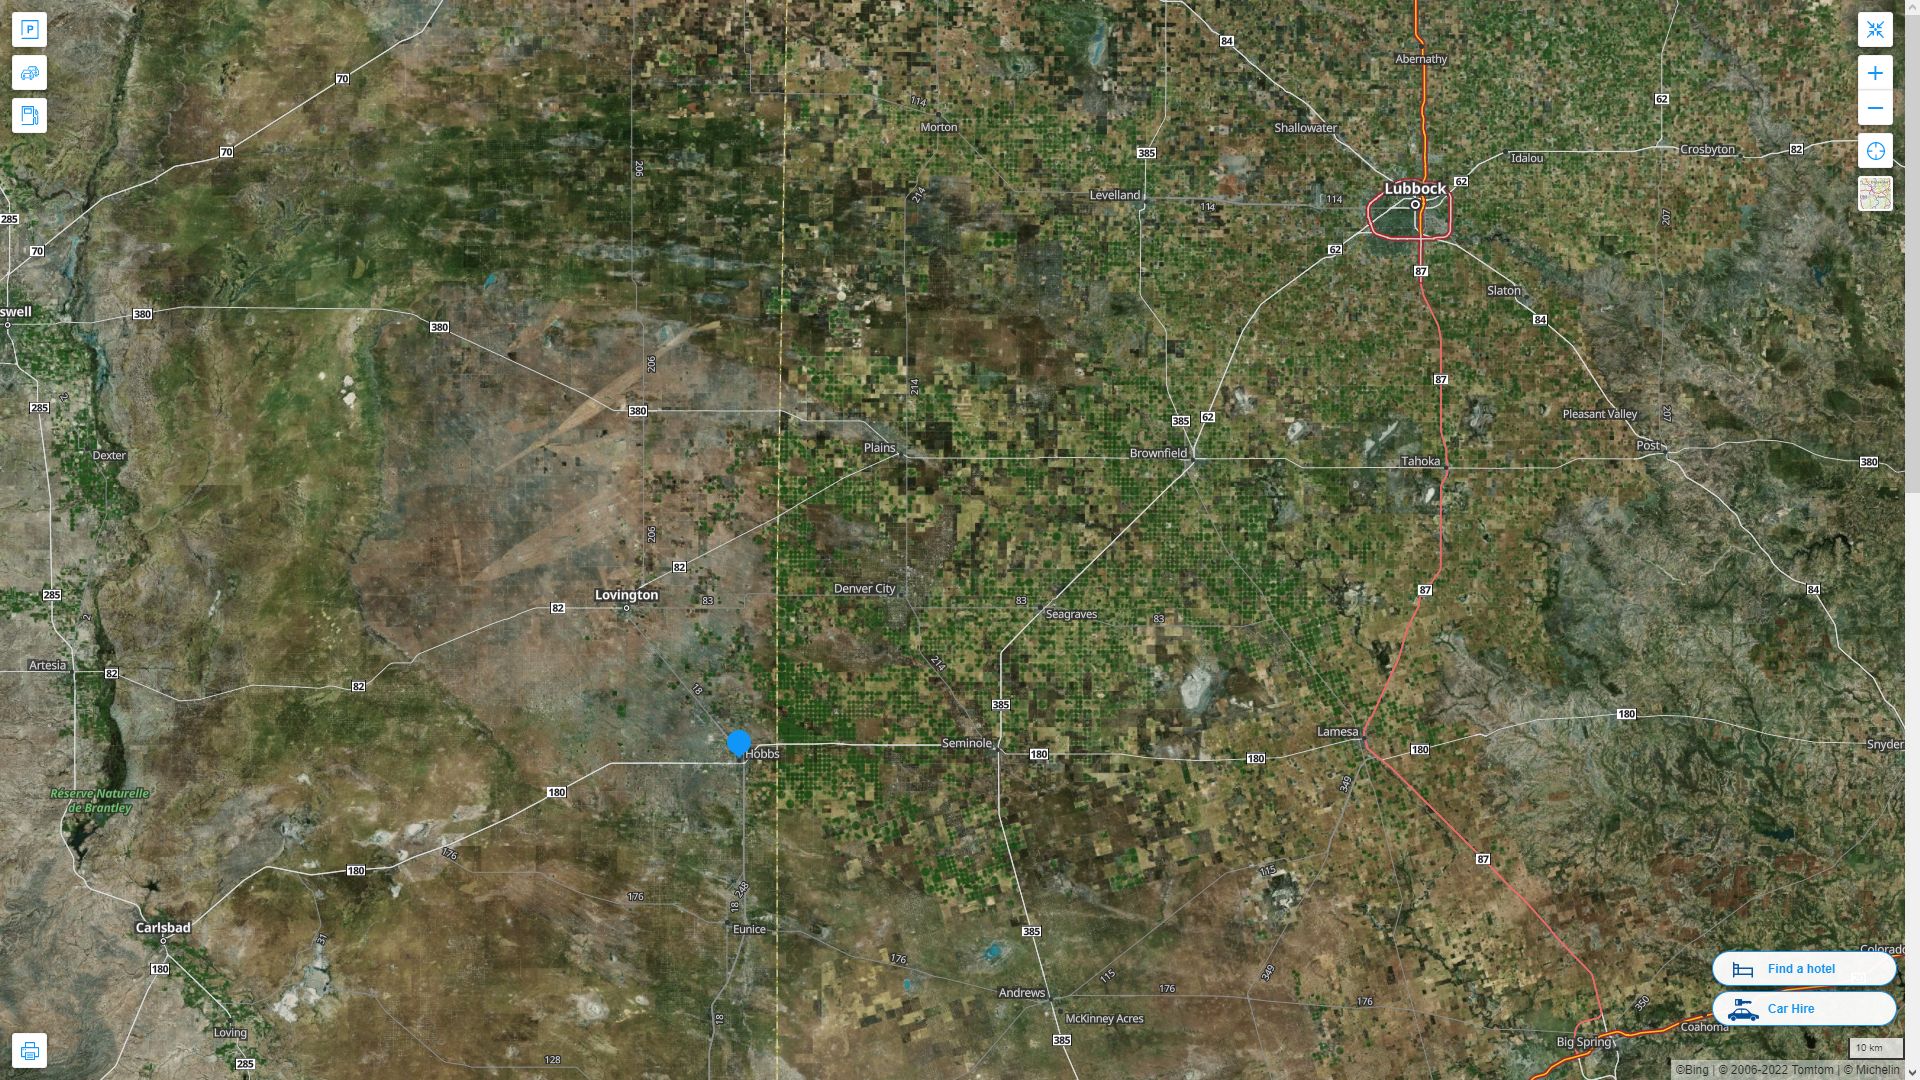 Hobbs New Mexico Highway and Road Map with Satellite View